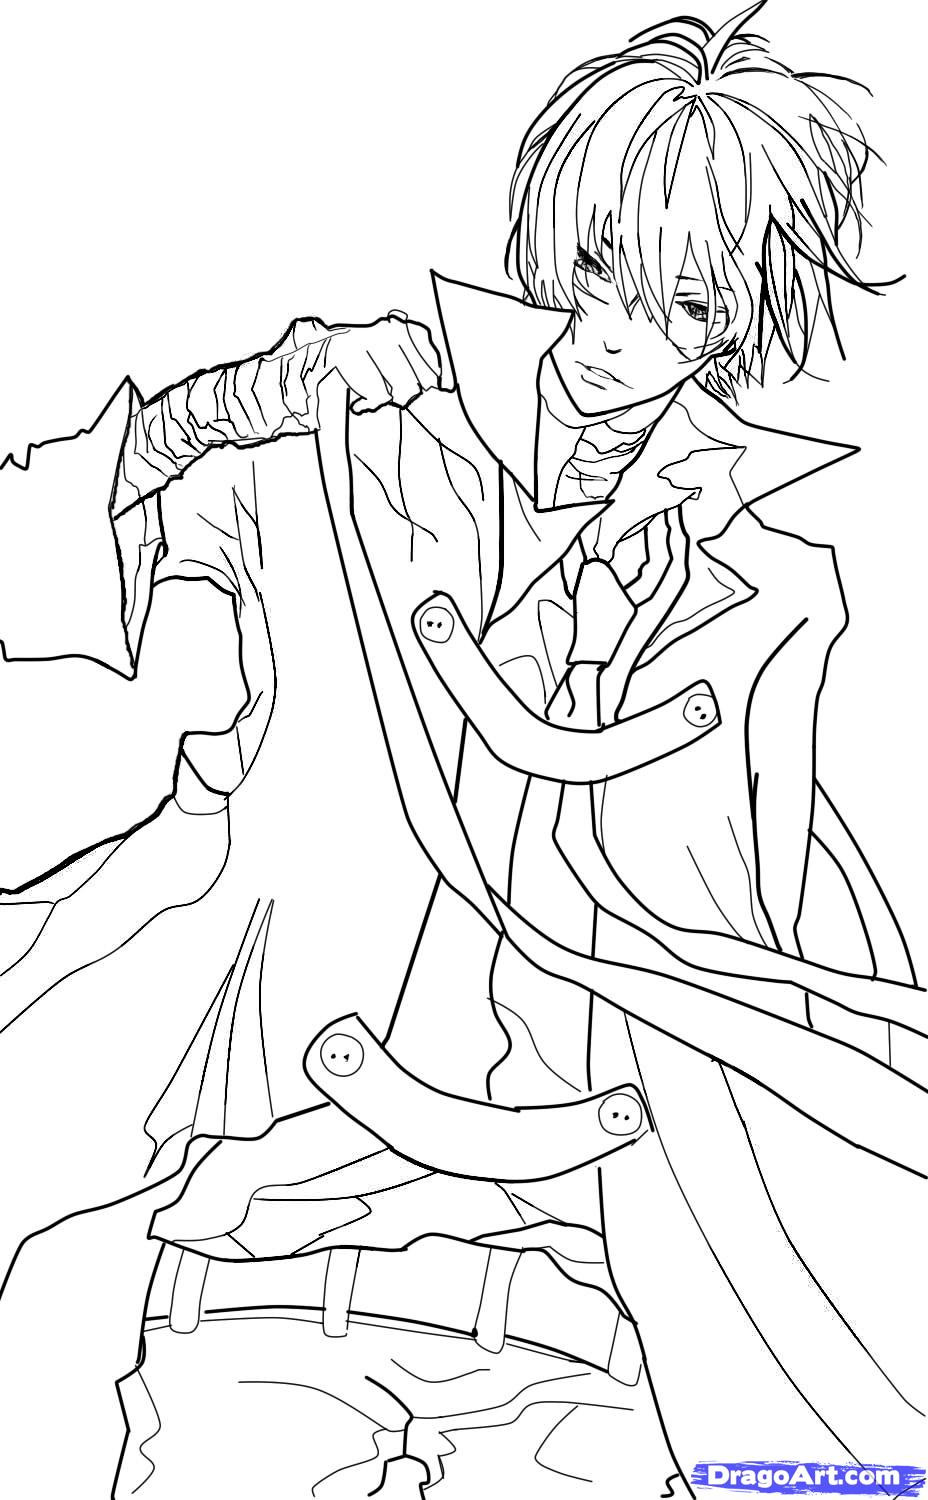 Anime Boy Coloring Pages
 How to Sketch an Anime Boy Step by Step Anime People